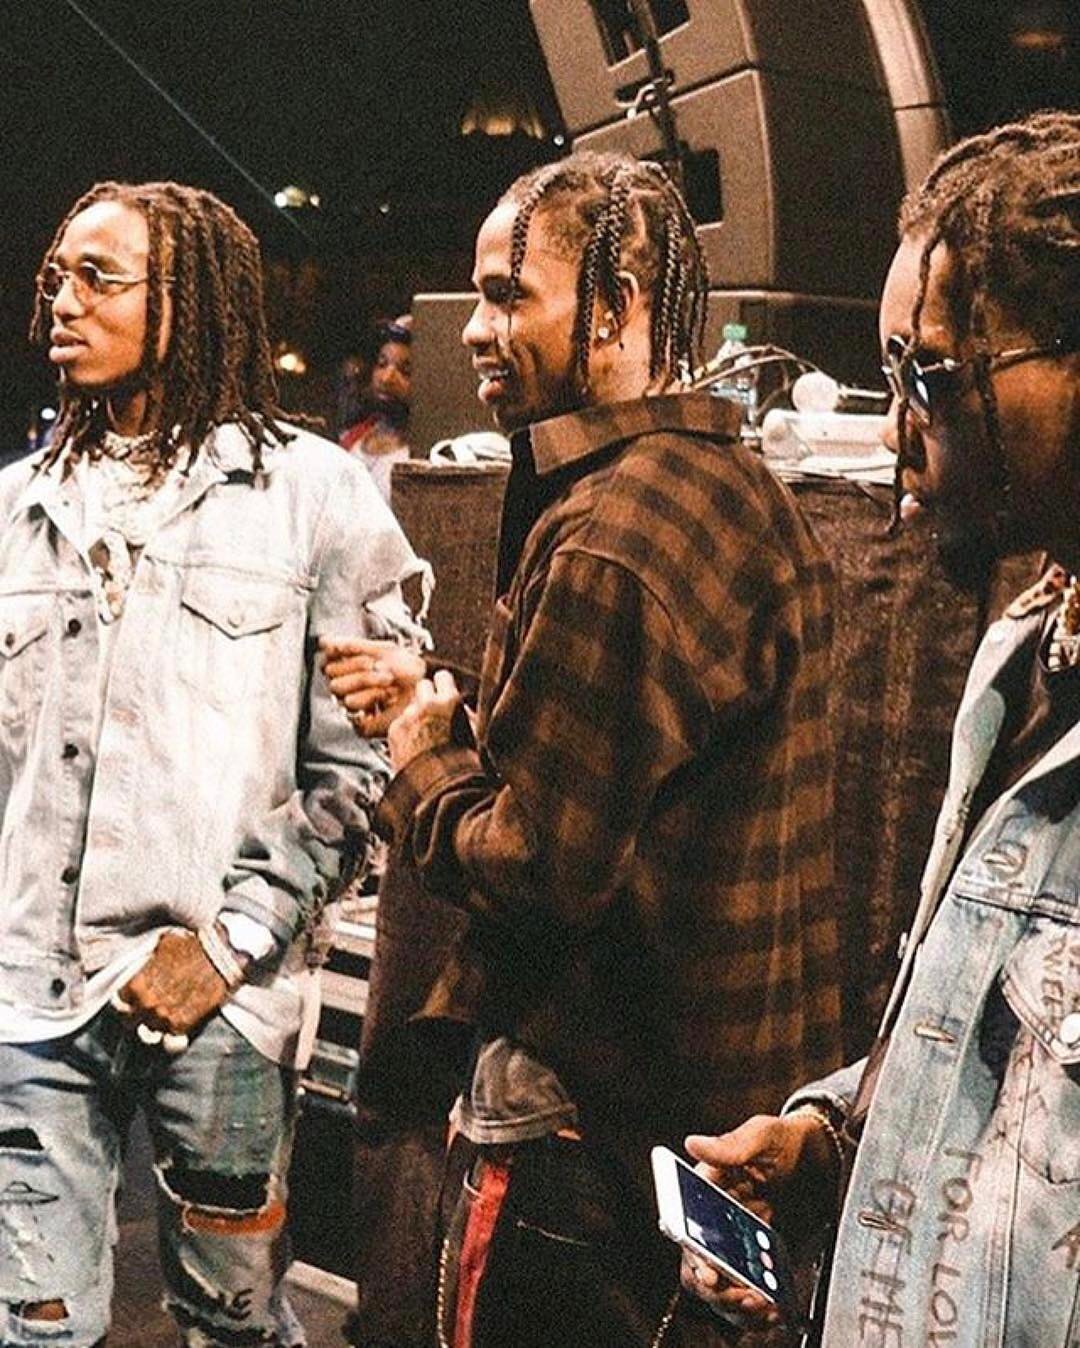 SPOTTED: Travis Scott, Quavo And Offset 